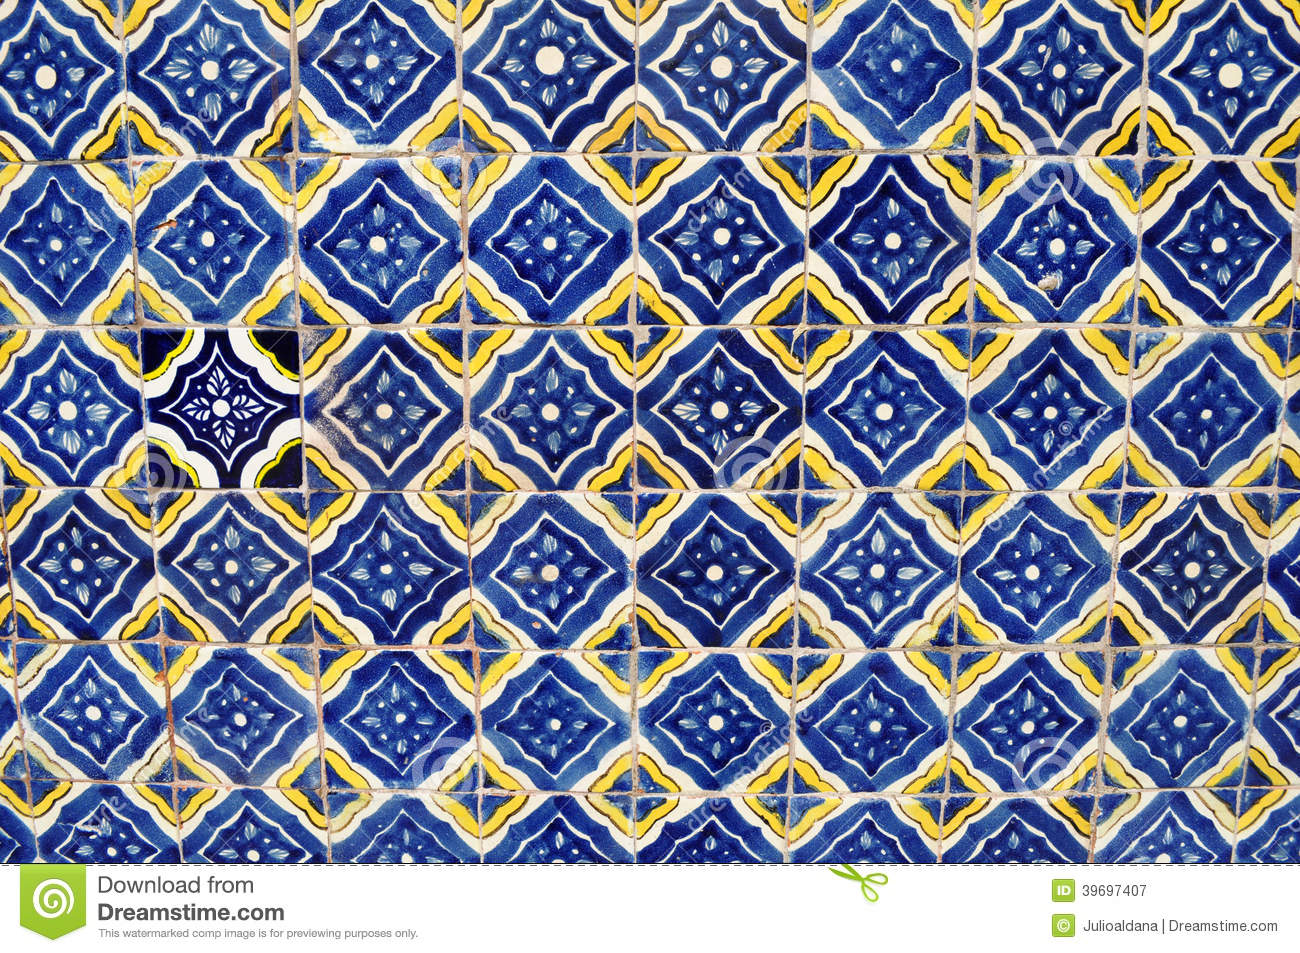 Ceramic Mosaic Wall Tile Background Texture Wallpaper Image39697407